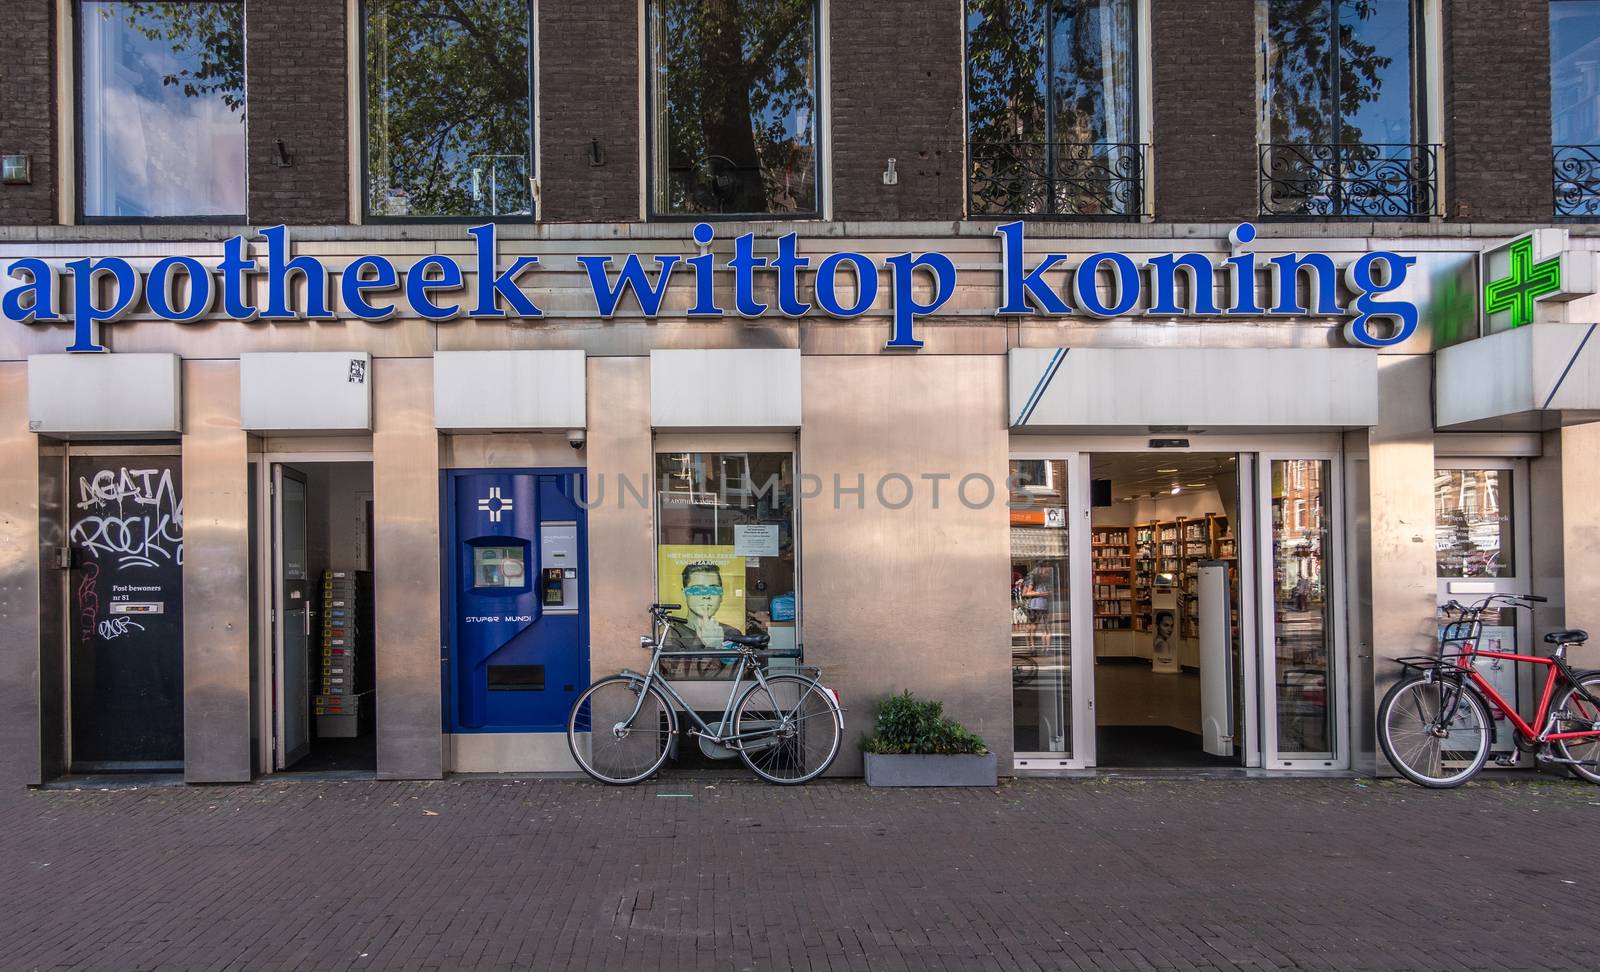 Wittop Koning pharmacy in Amsterdam Netherlands. by Claudine